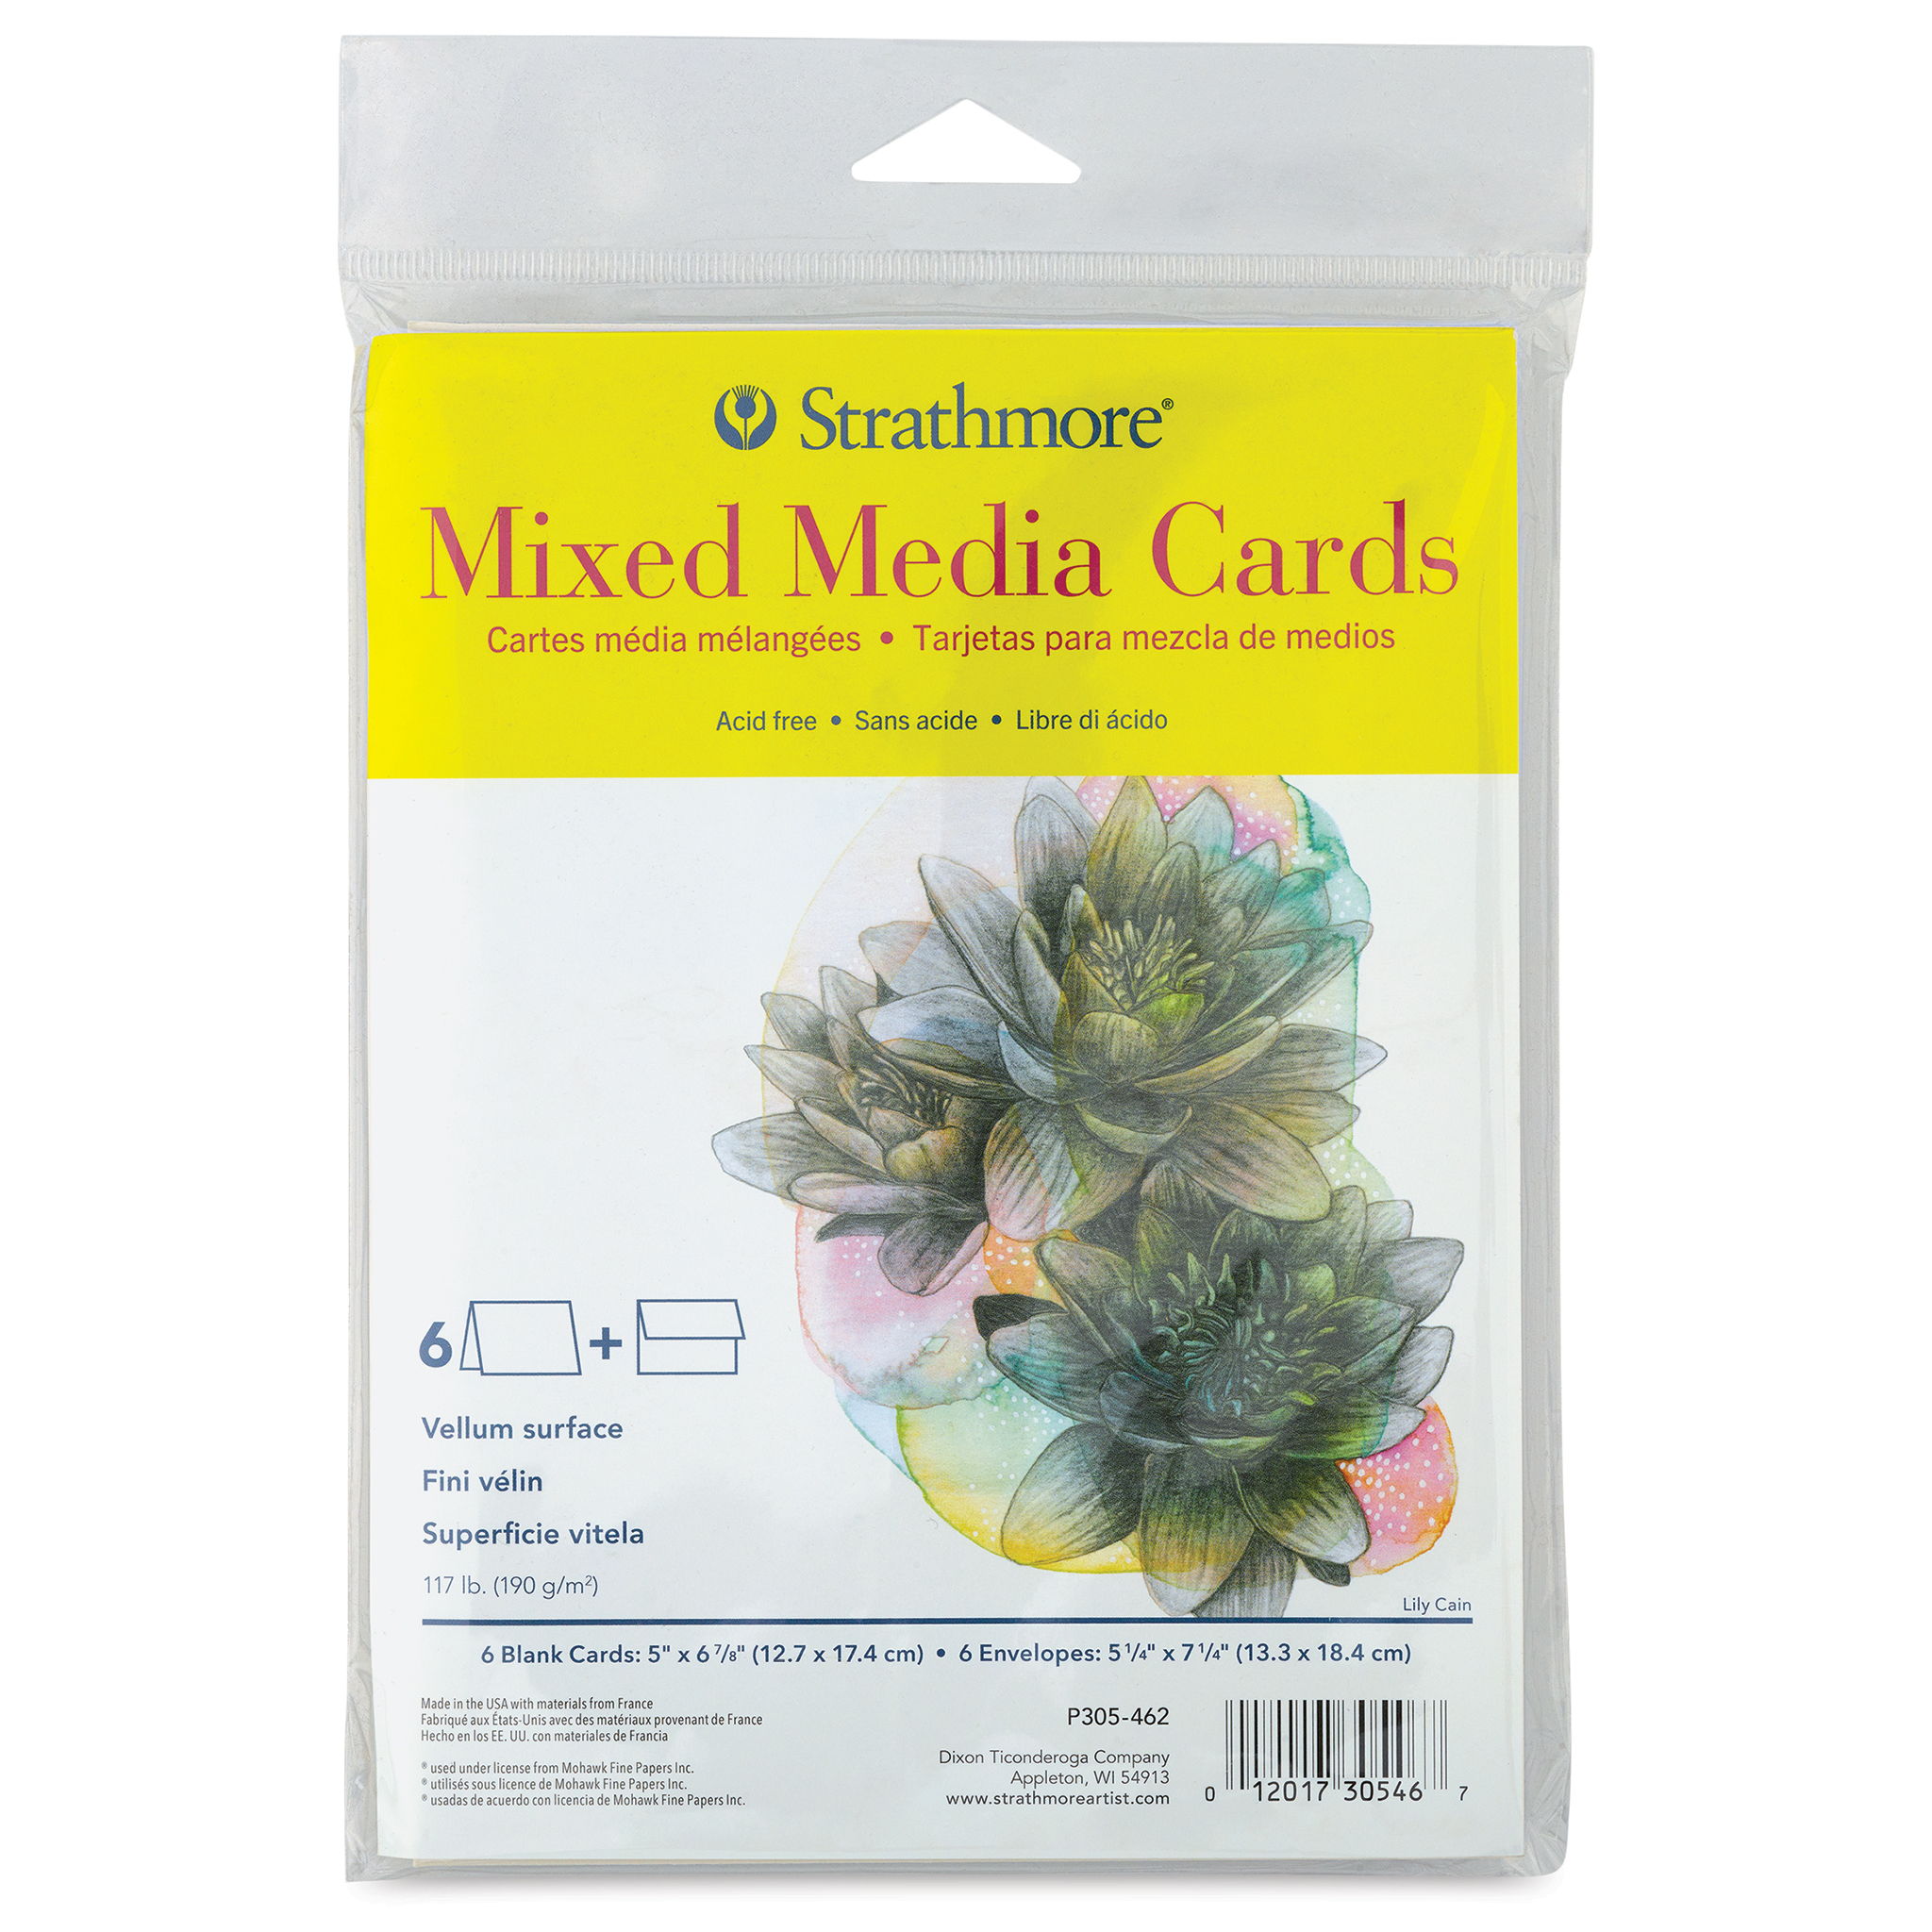 Strathmore 300 Series Mixed Media Cards and Envelopes - Announcement size, 3-1/2 inch x 4-7/8 inch, Pkg of 6, Size: Medium